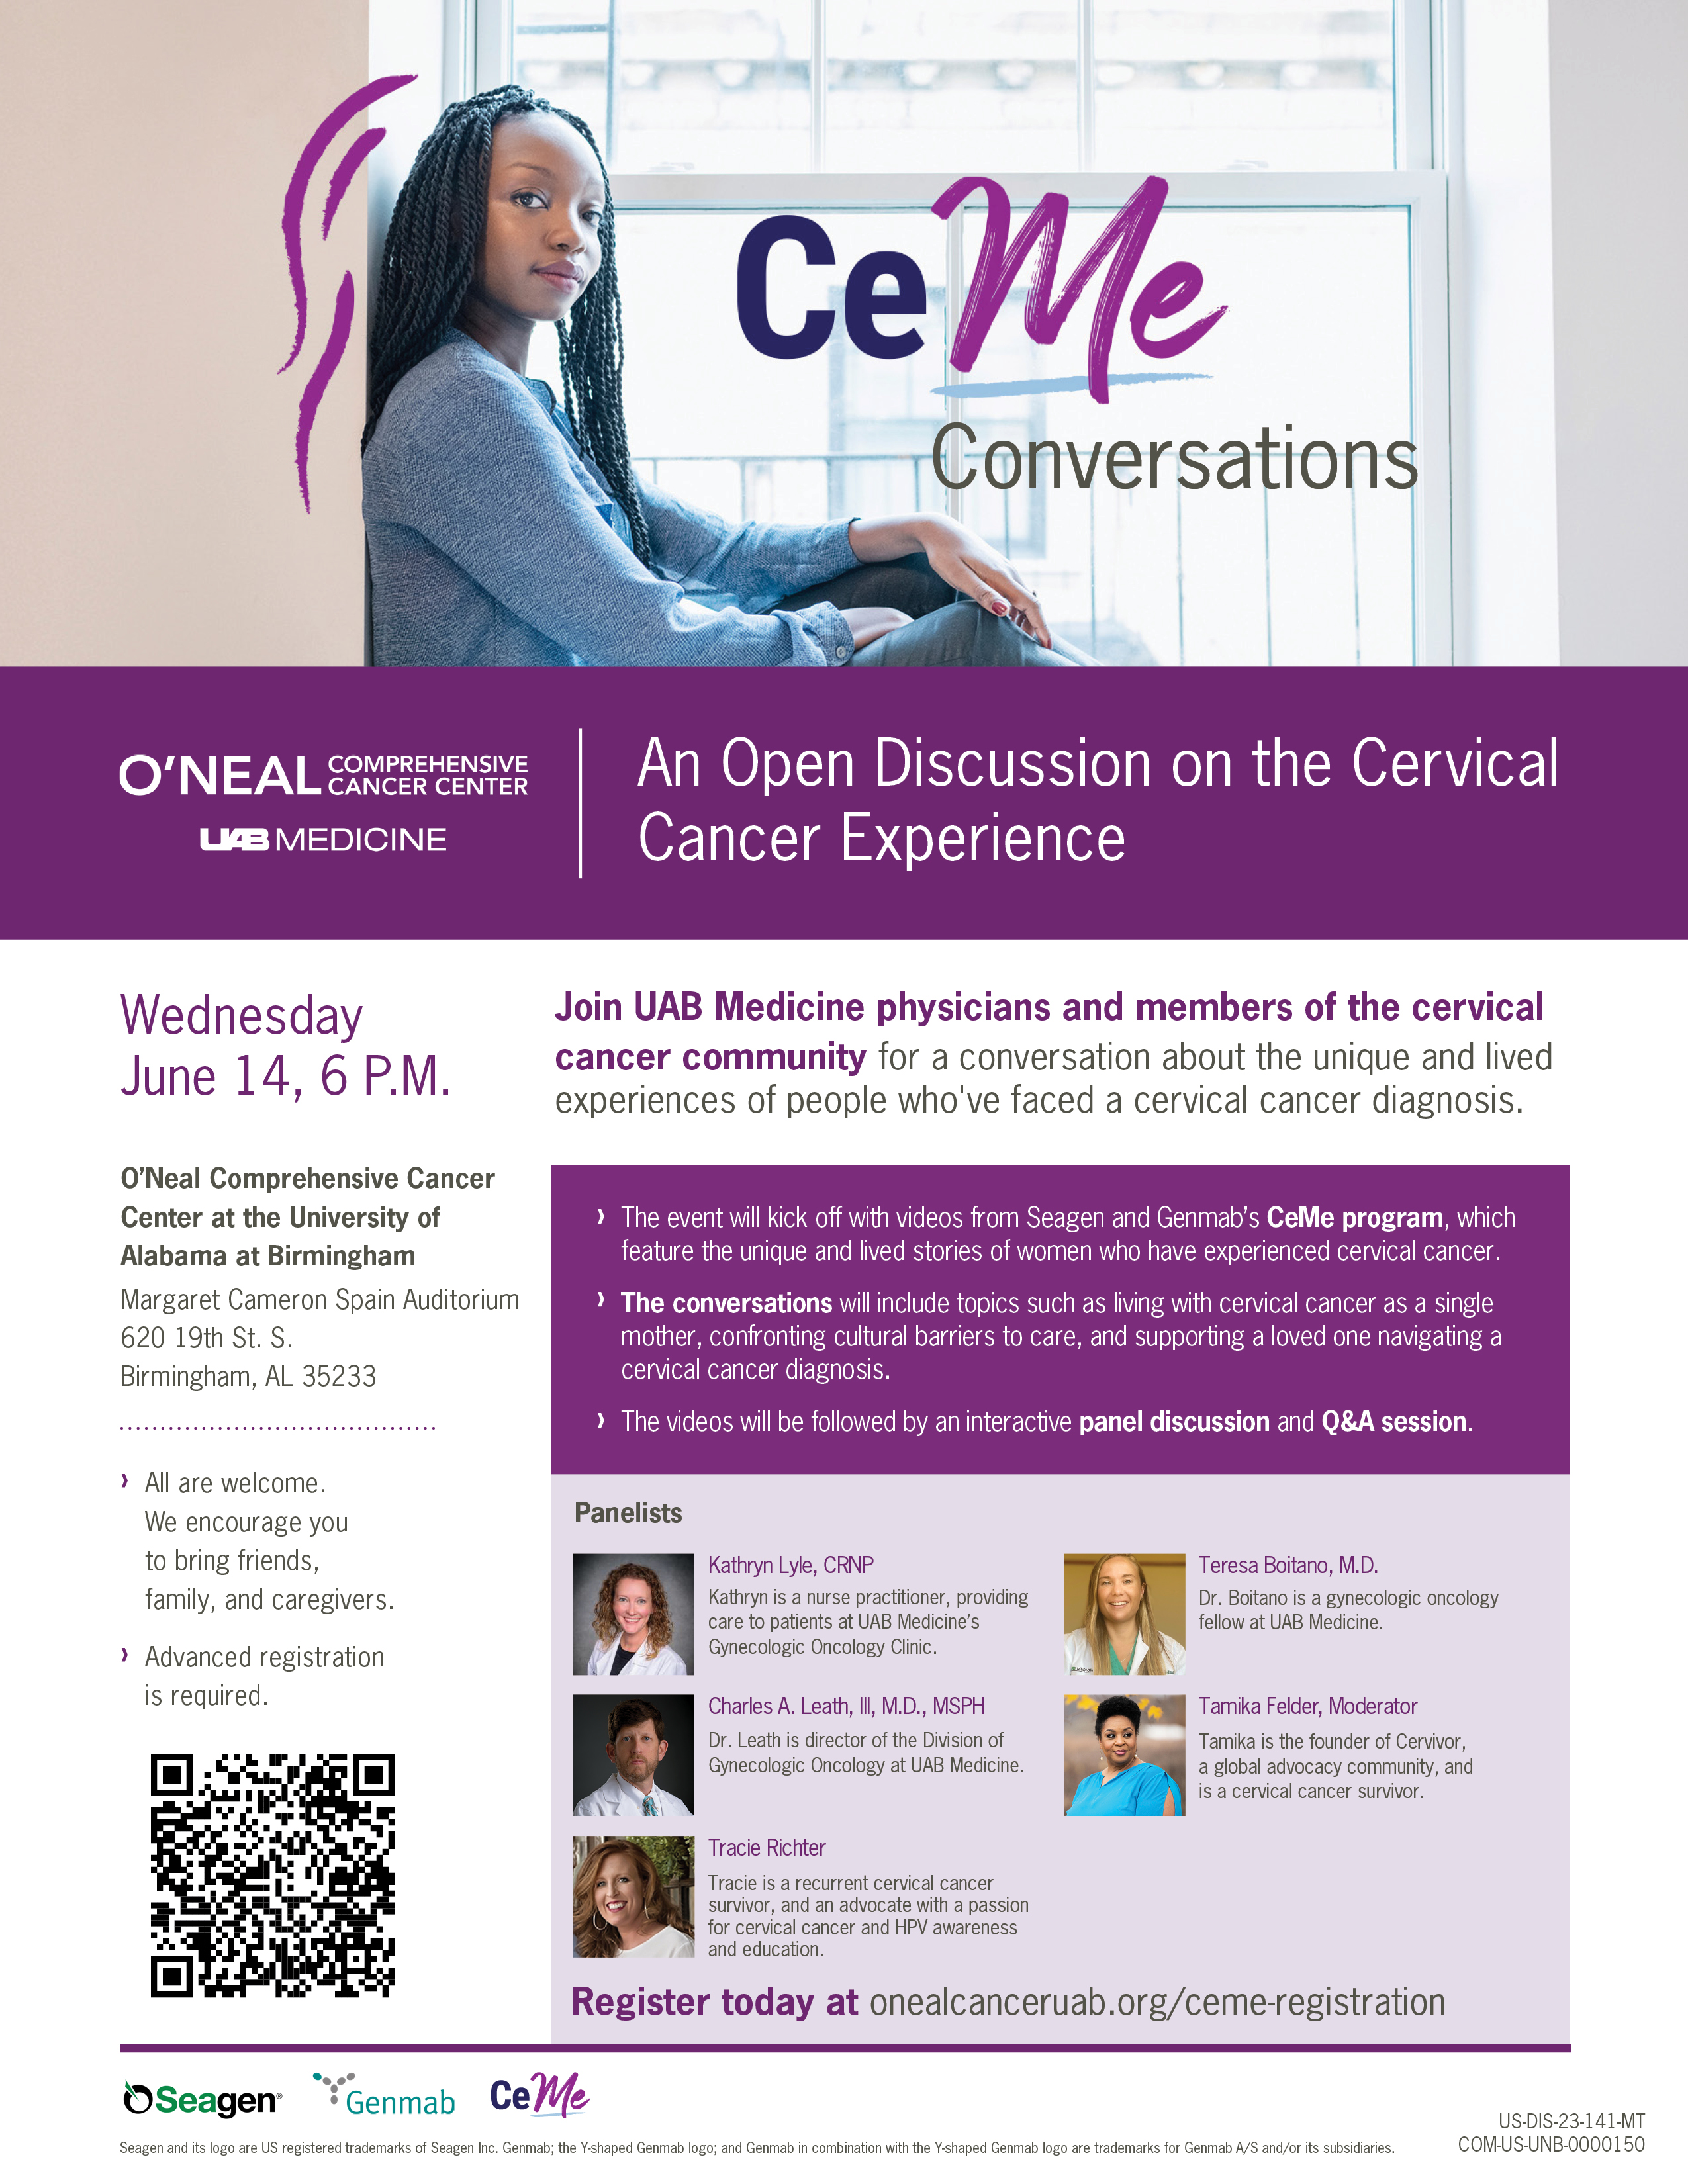 CeMe Conversations Event Wednesday, June 14, at 6 p.m. Flyer